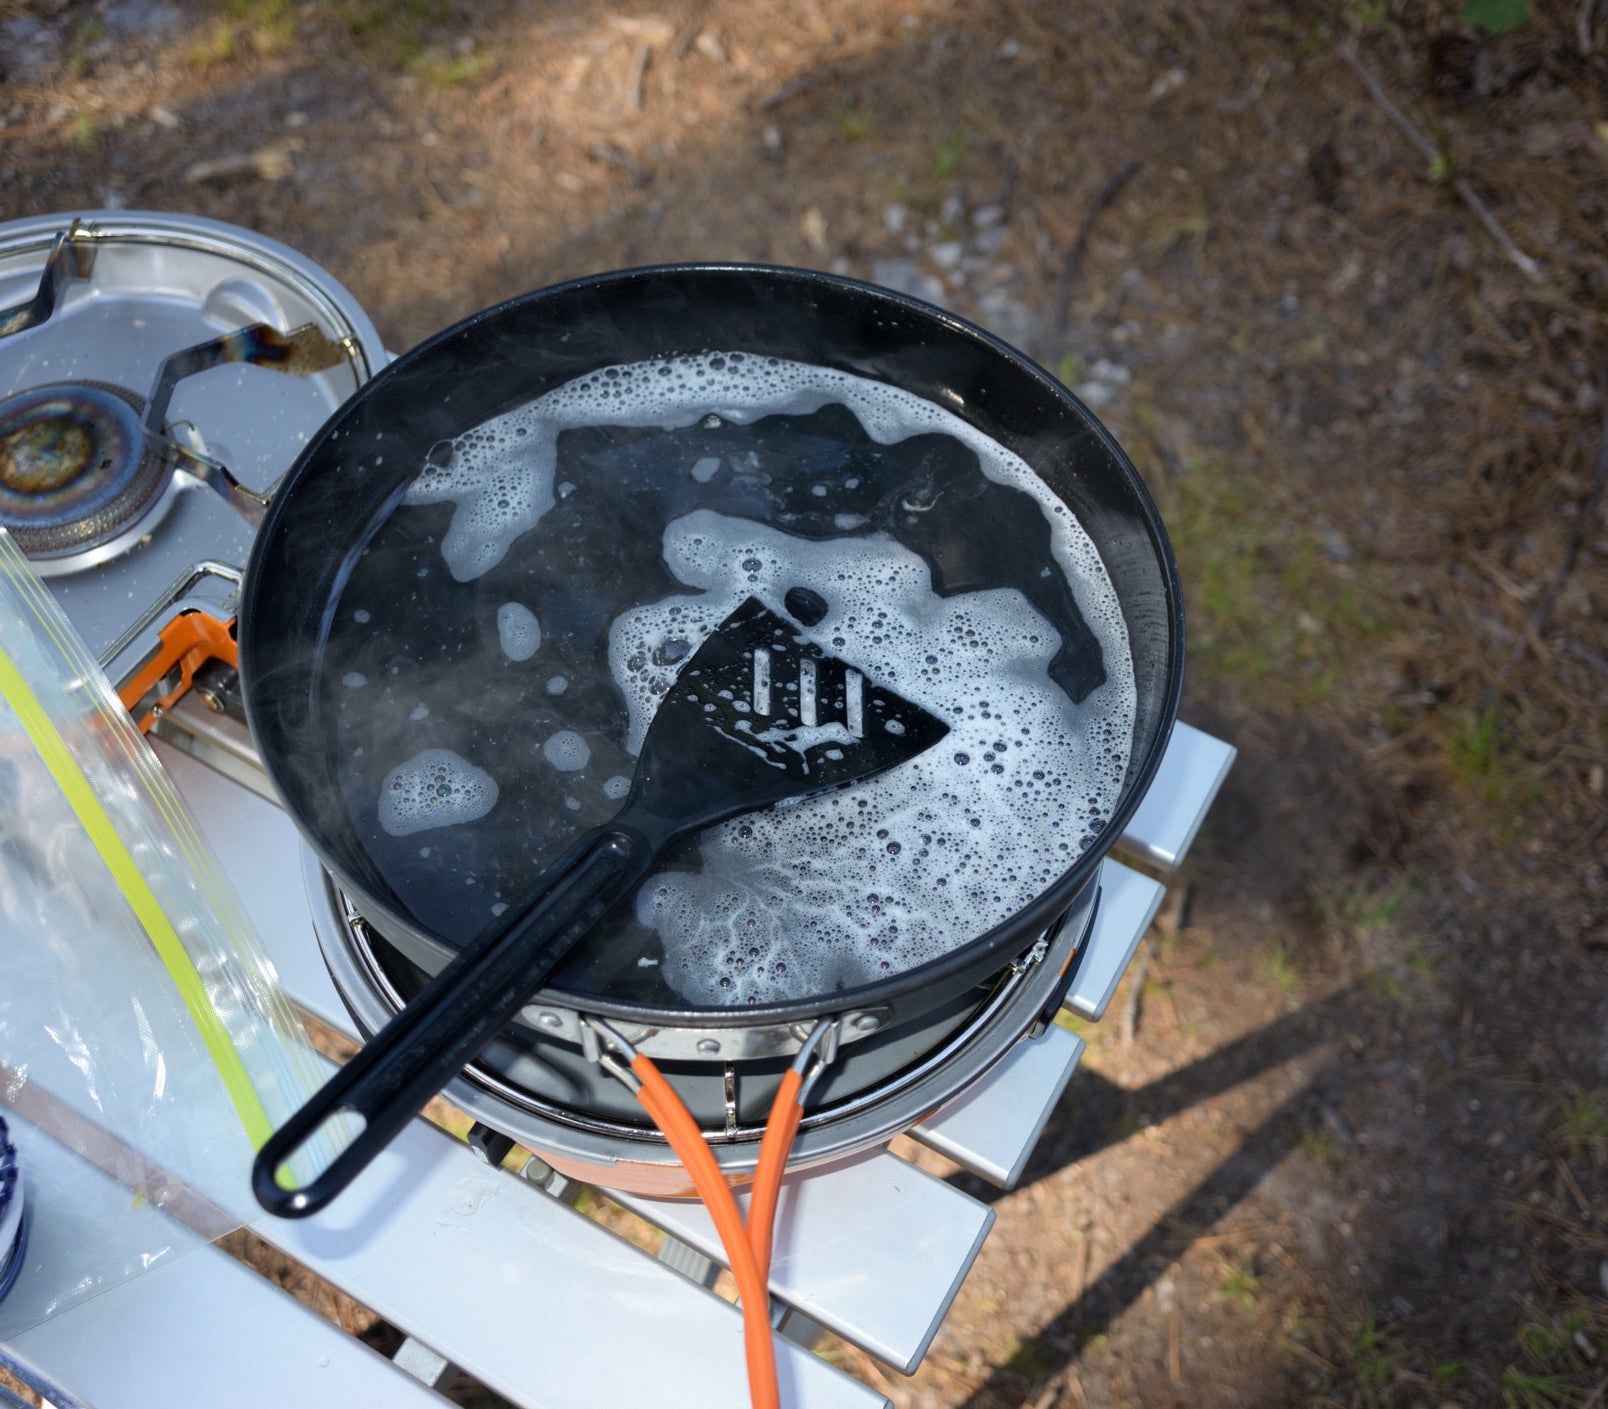 Cleaning a cooking pan and spatula on the camp stove